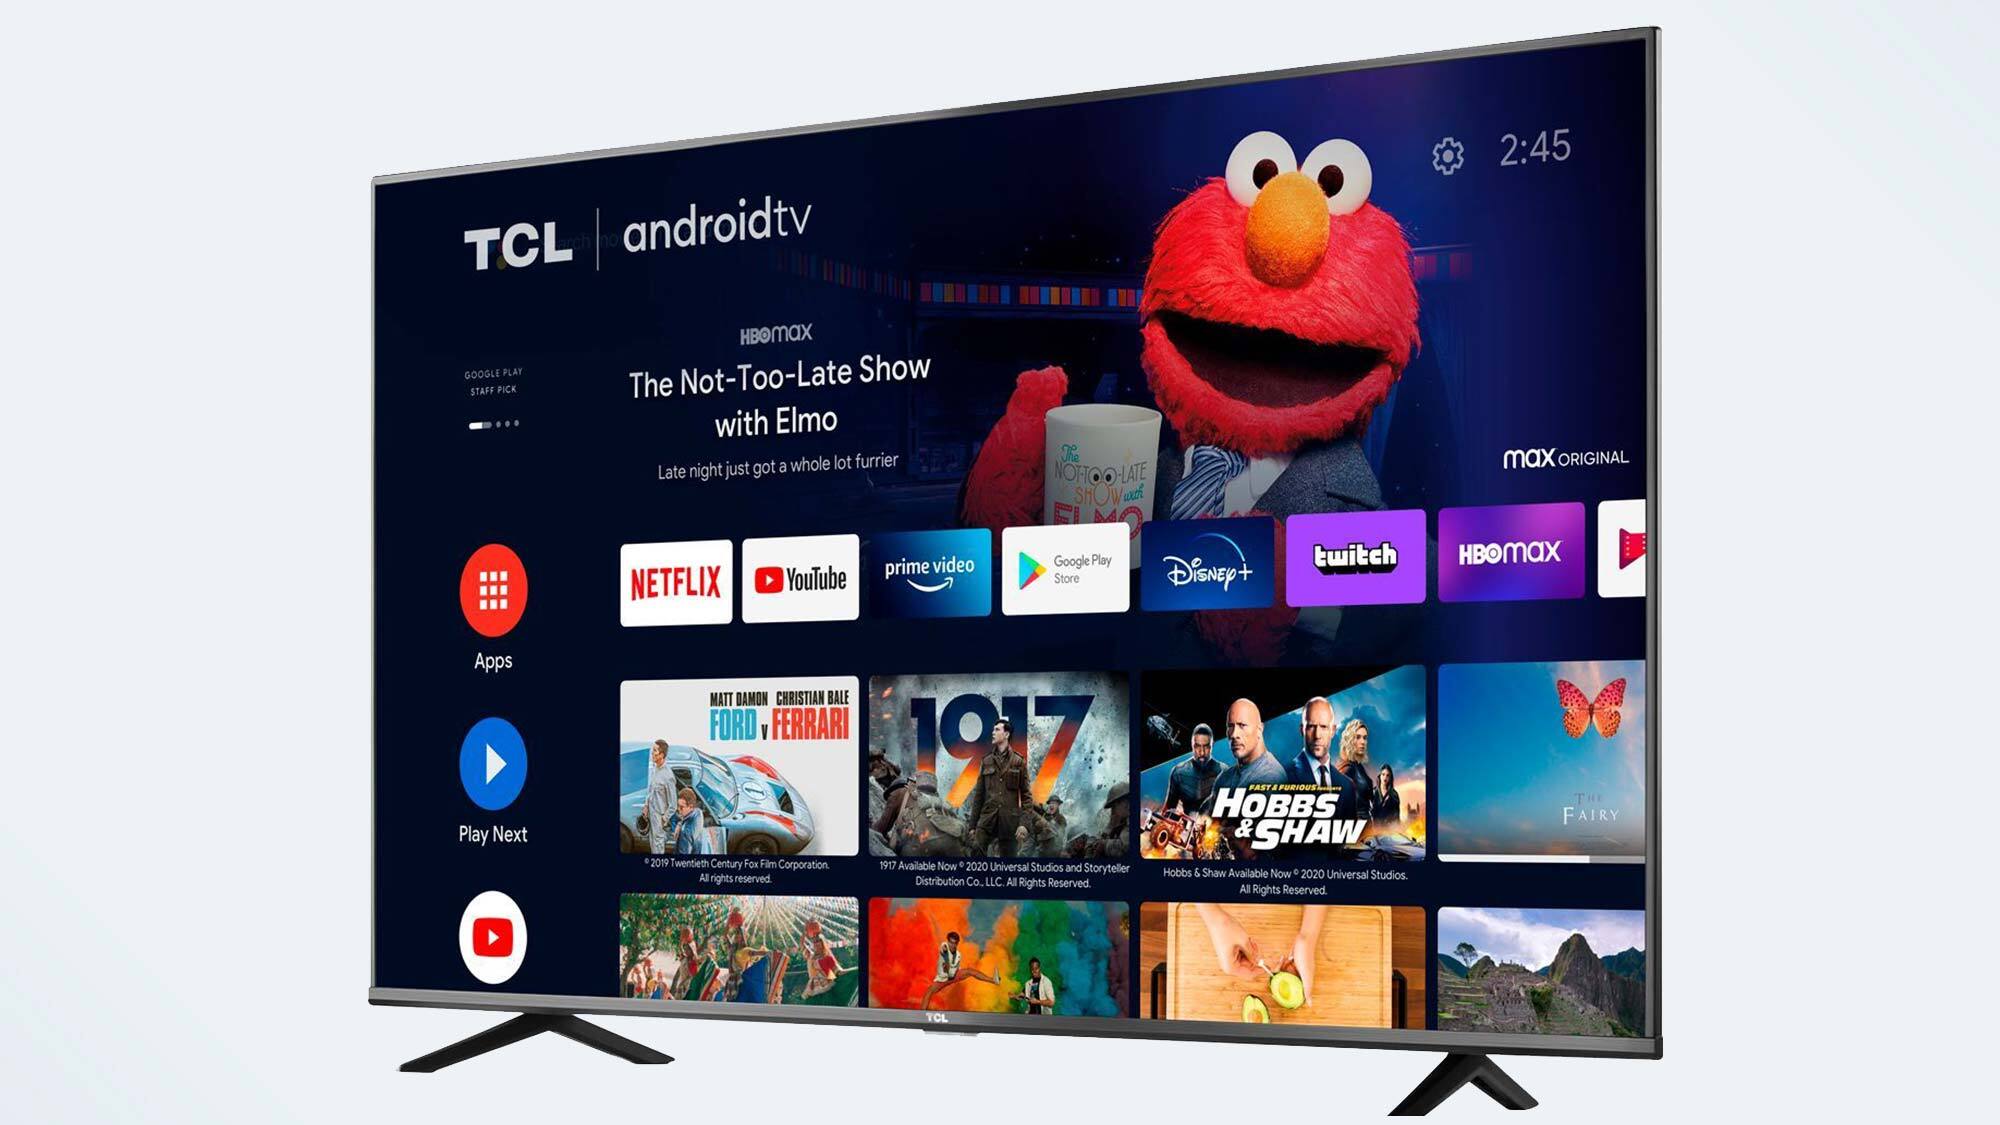 Best TCL TVs: TCL 4-Series Android TV (S434)